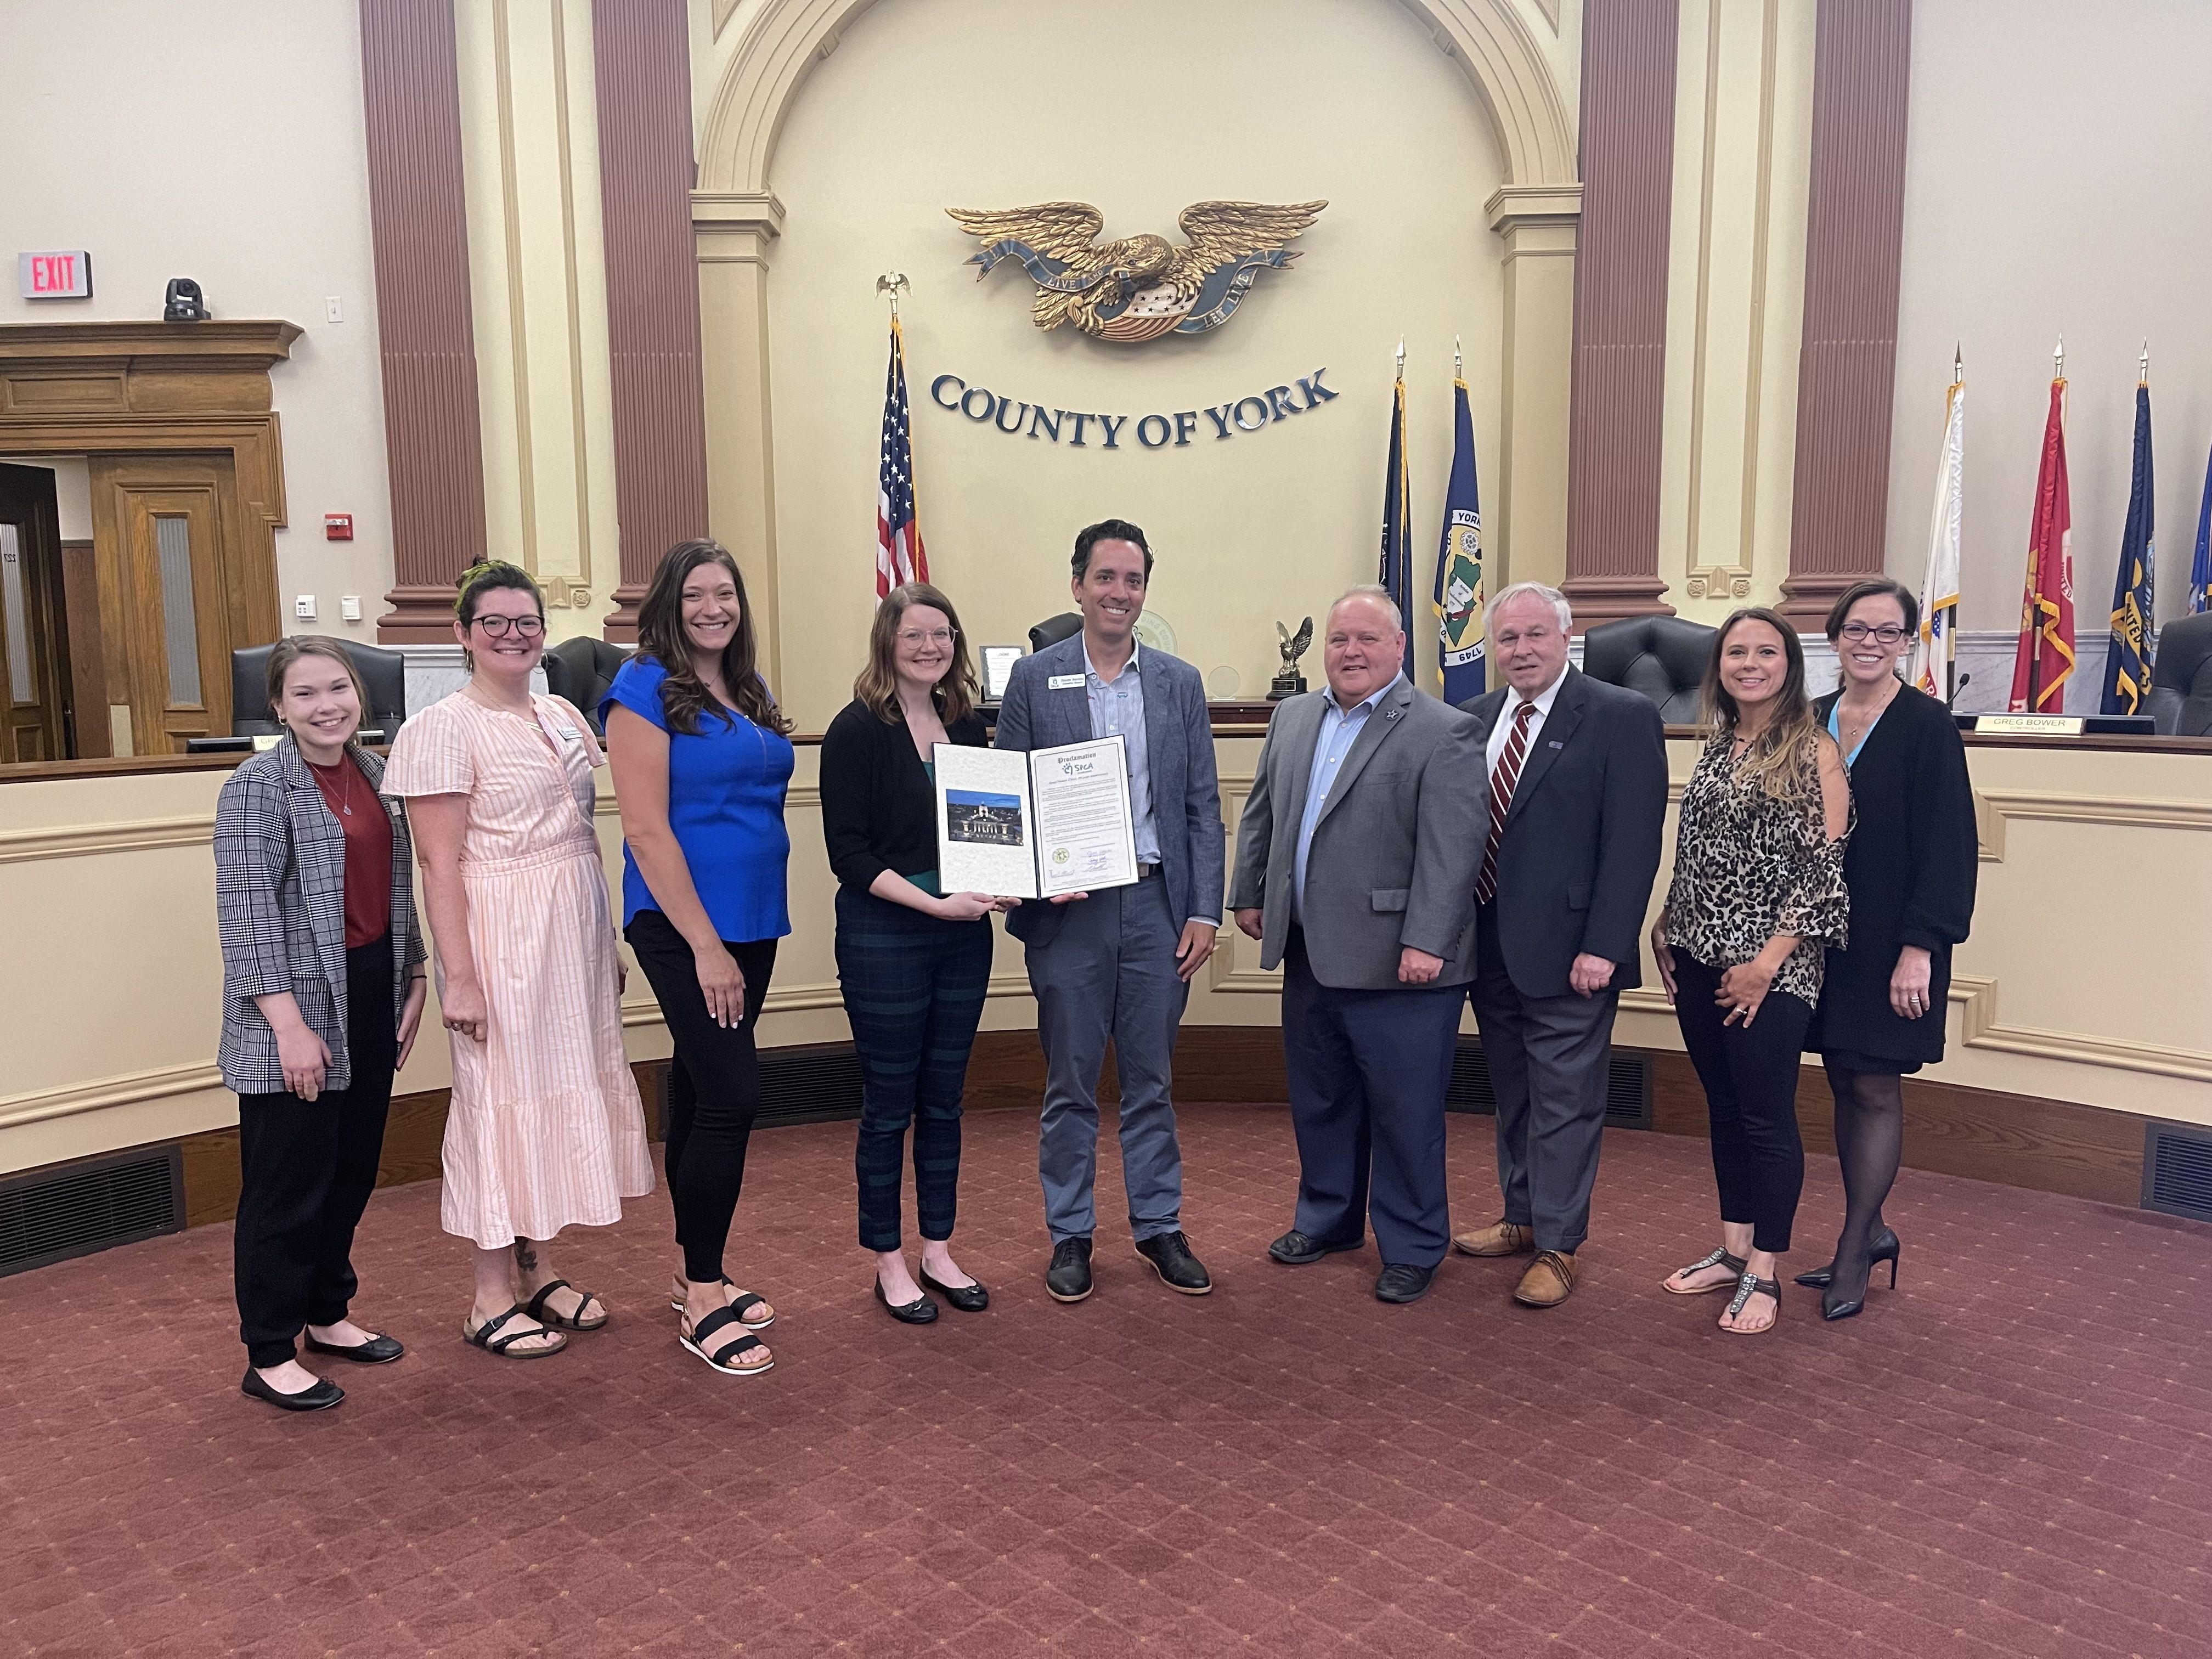 Spay/ Neuter Clinic Receives County-Wide Proclamation for Ten Years of Service